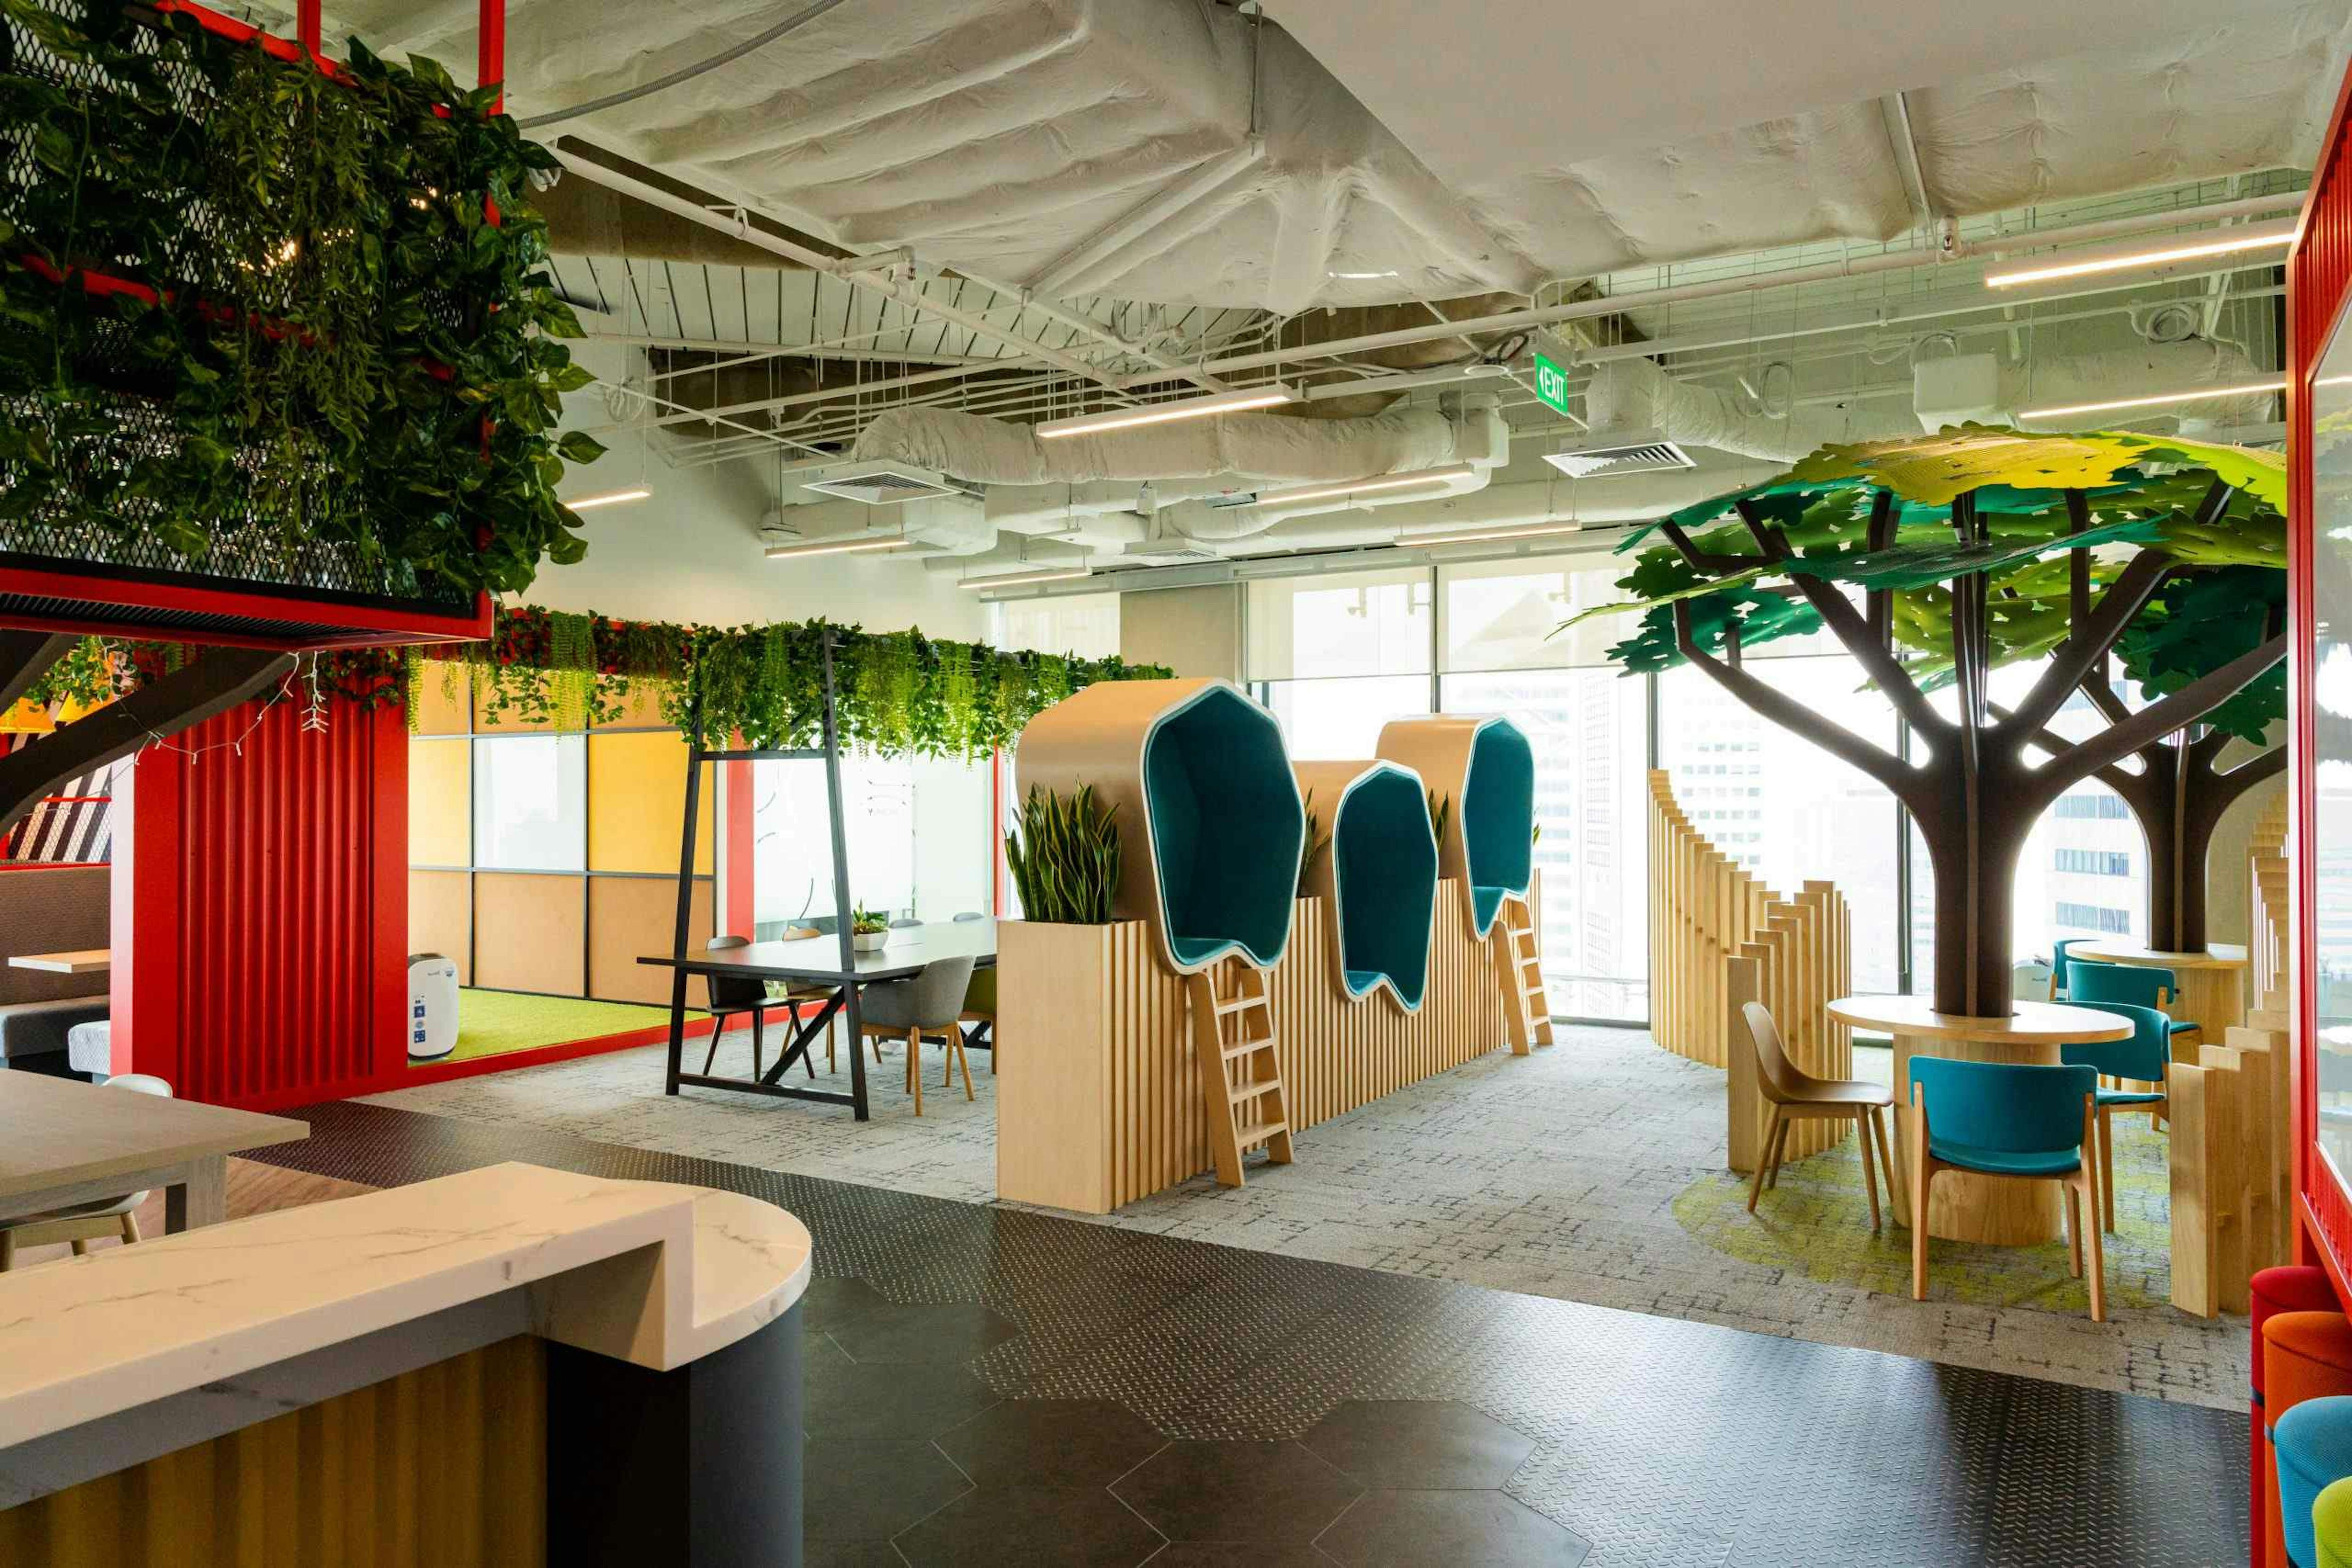 Tech Company's Office Space Puts the Fun in Functional